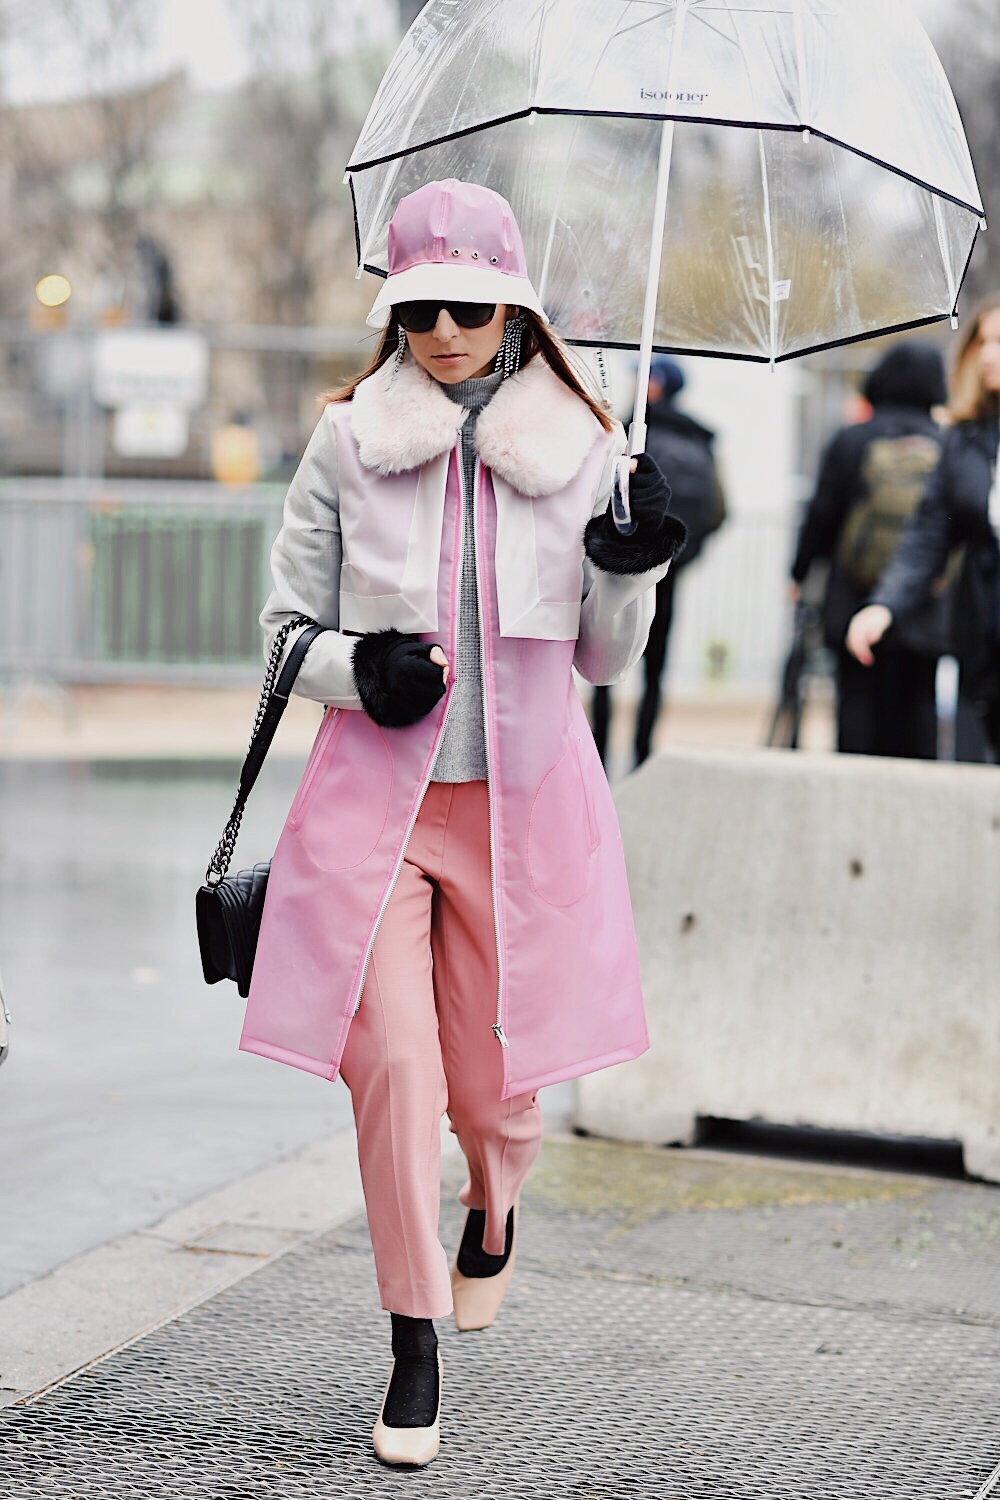 Chanel Street Style Paris Fashion Week Fall 2019 / March 2019 Julia Comil / French Fashion Blogger in Los Angeles Outfit for PFW Fall Winter 2019 show - wearing La Seine et Moi coat and bucket hat, demain officiel pants, chanel boy bag and chanel sunglasses, crystal earrings Isabel Marant